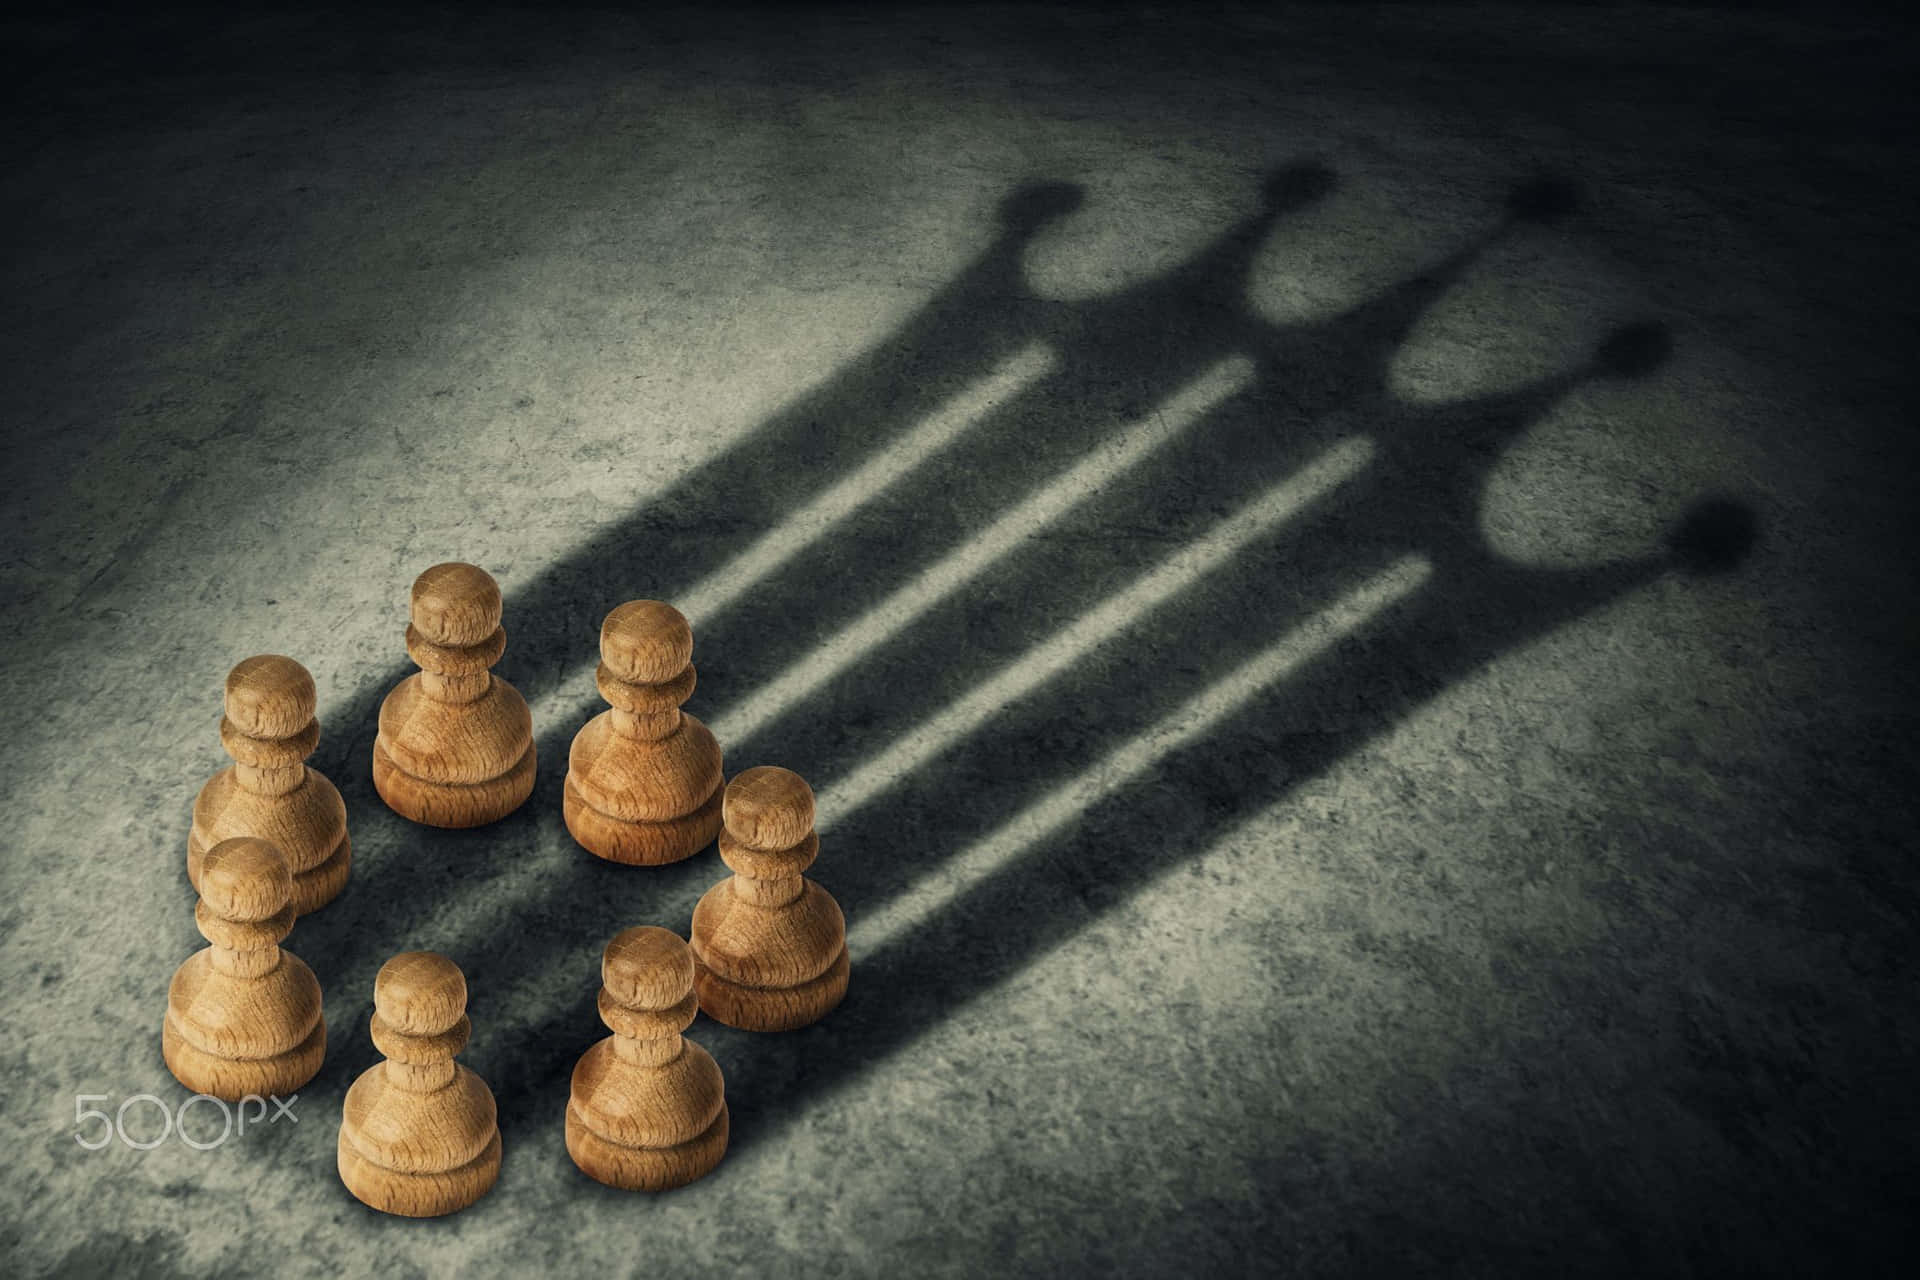 Chess Pawn Queen Tactics 4K HD Wallpapers, HD Wallpapers